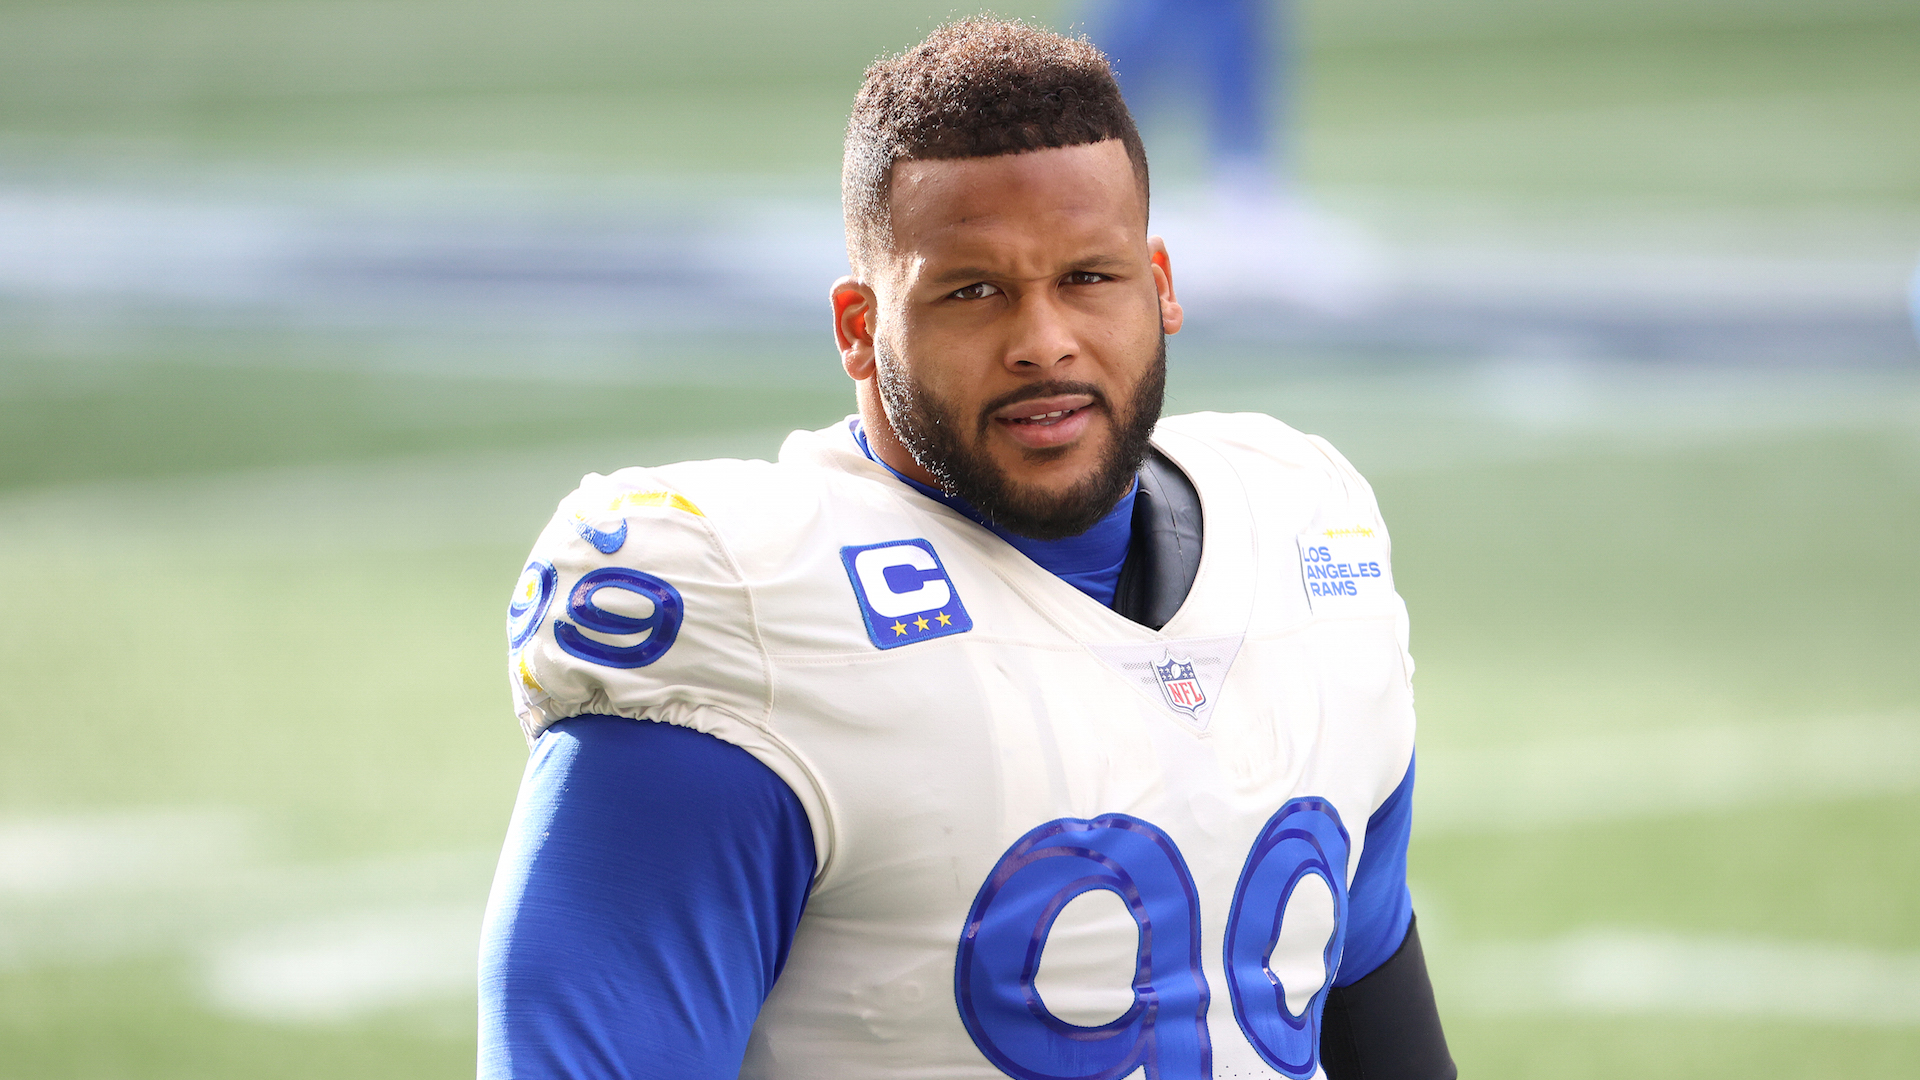 Aaron Donald #99 of the Los Angeles Rams looks on